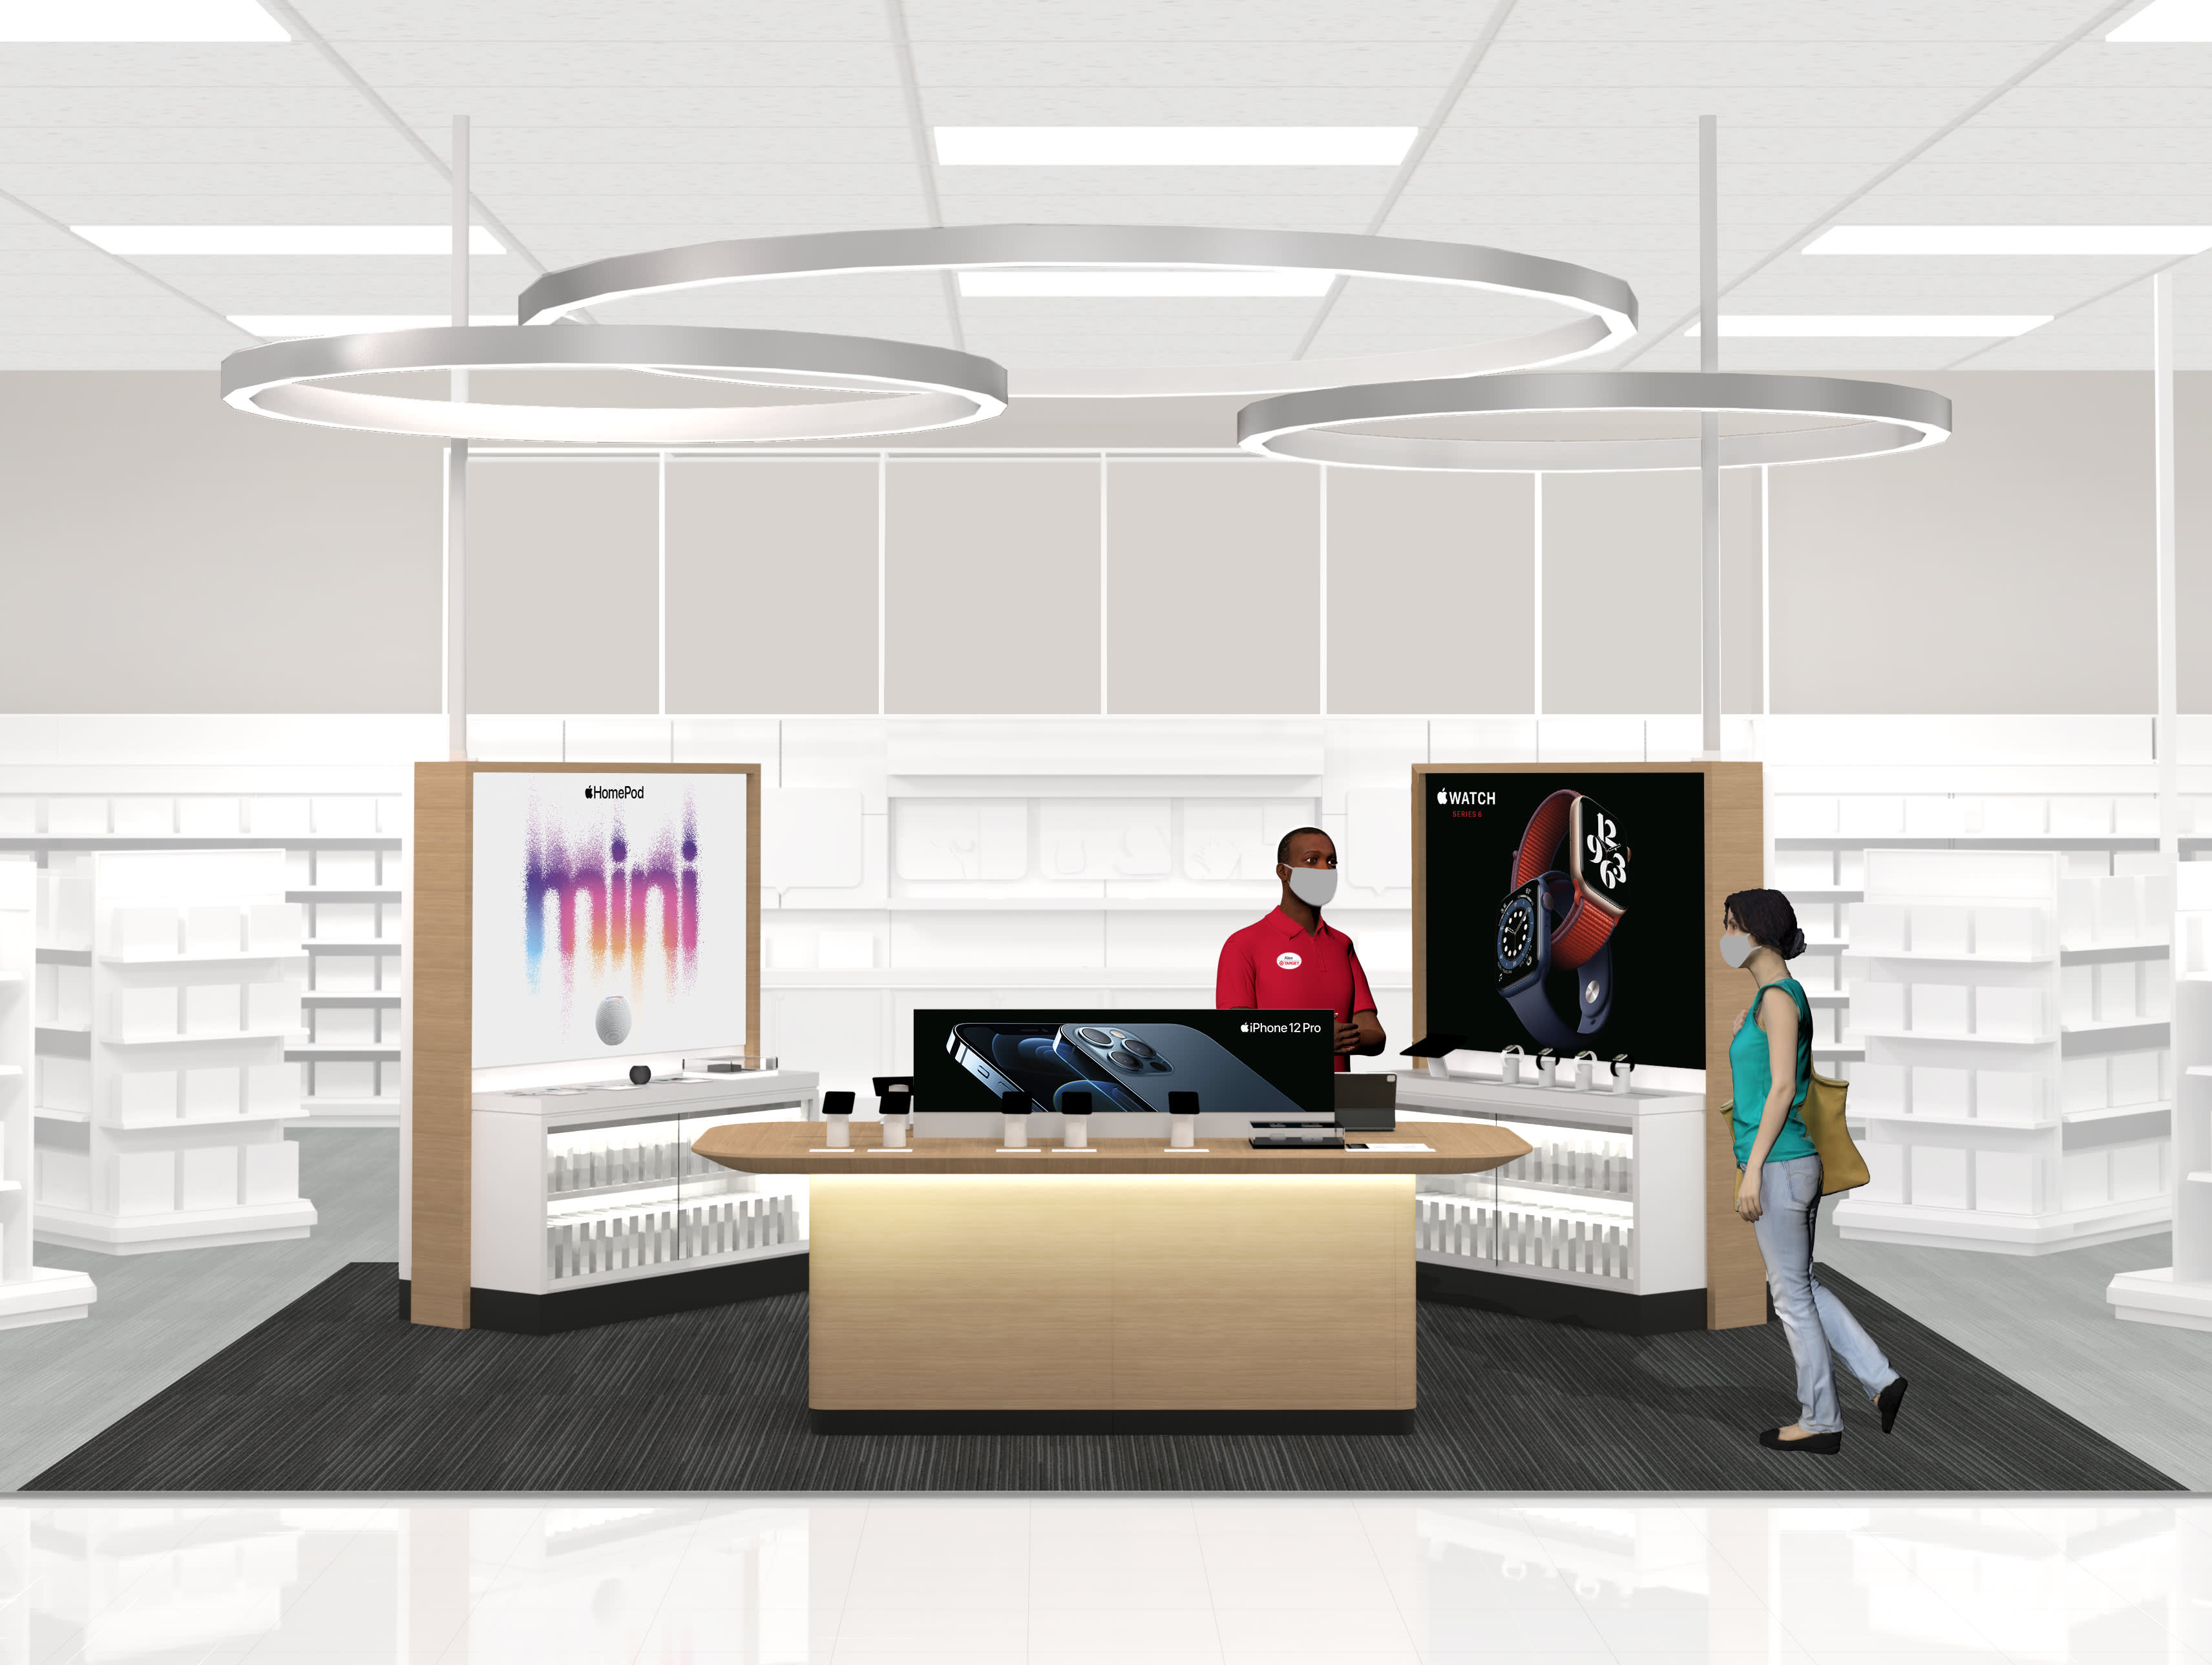 Target to open Apple mini stores in the last move to attract customers